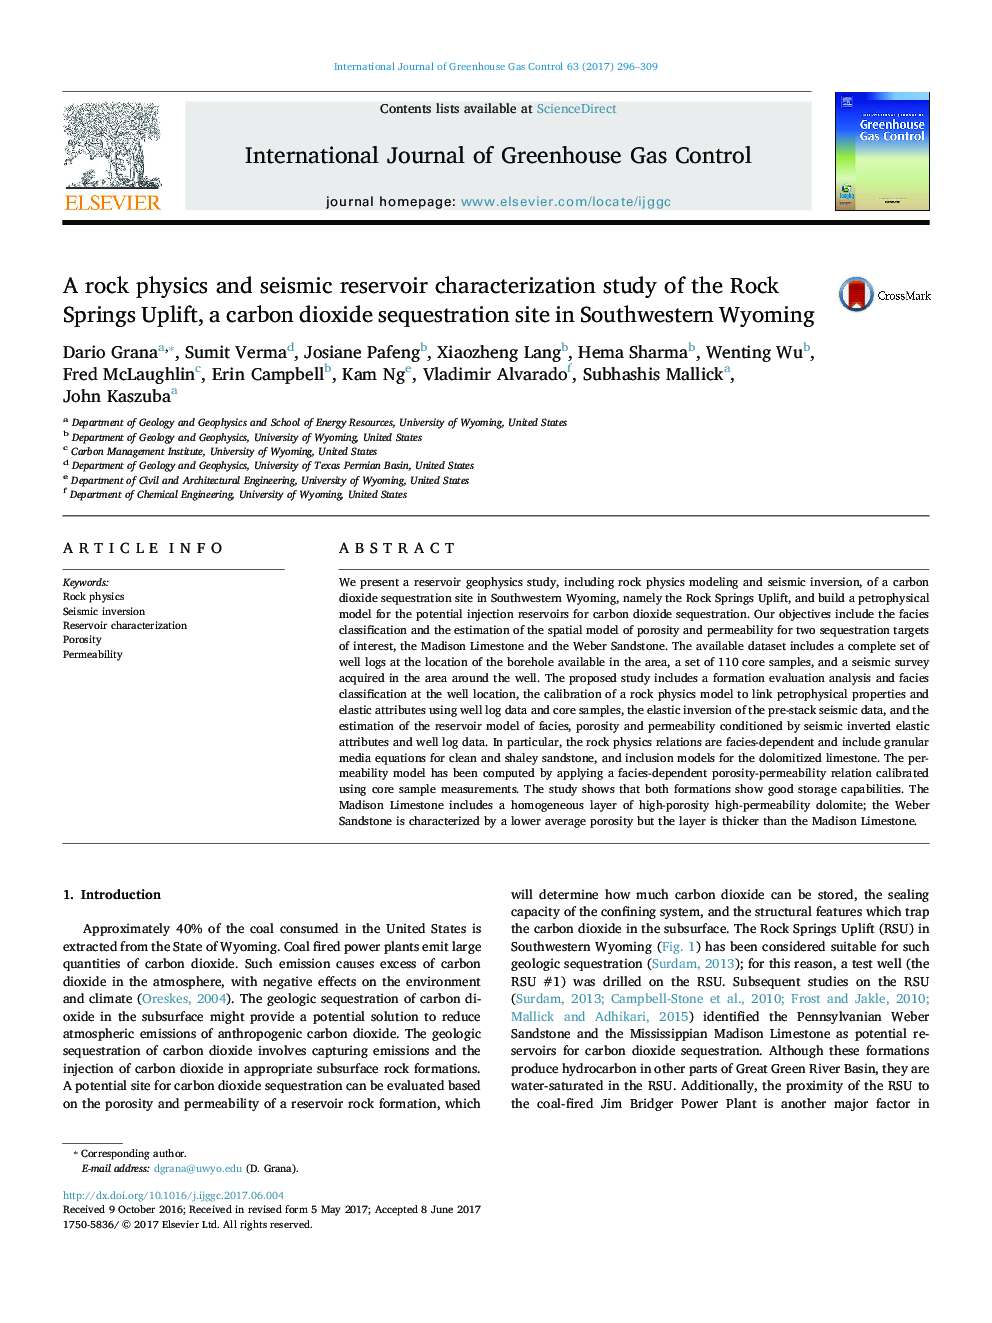 A rock physics and seismic reservoir characterization study of the Rock Springs Uplift, a carbon dioxide sequestration site in Southwestern Wyoming